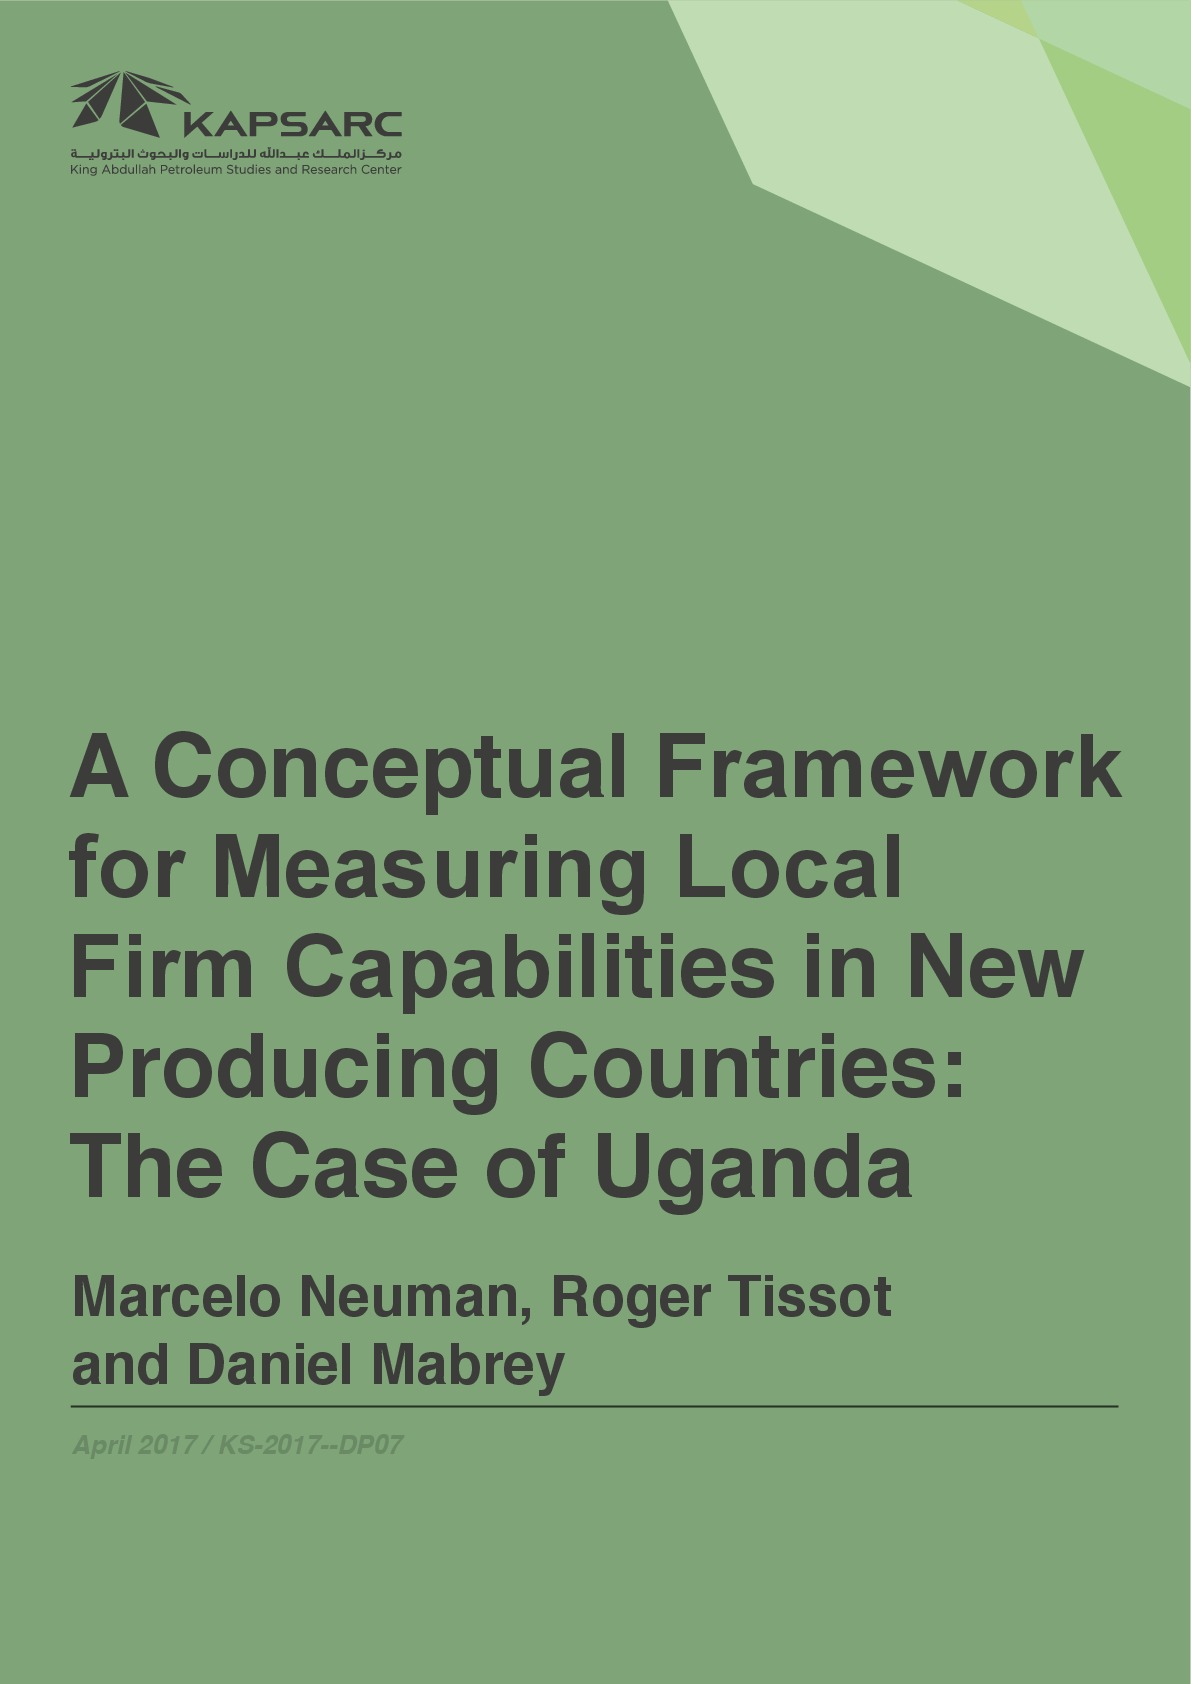 A Conceptual Framework for Measuring Local Firm Capabilities in New Producing Countries: The Case of Uganda